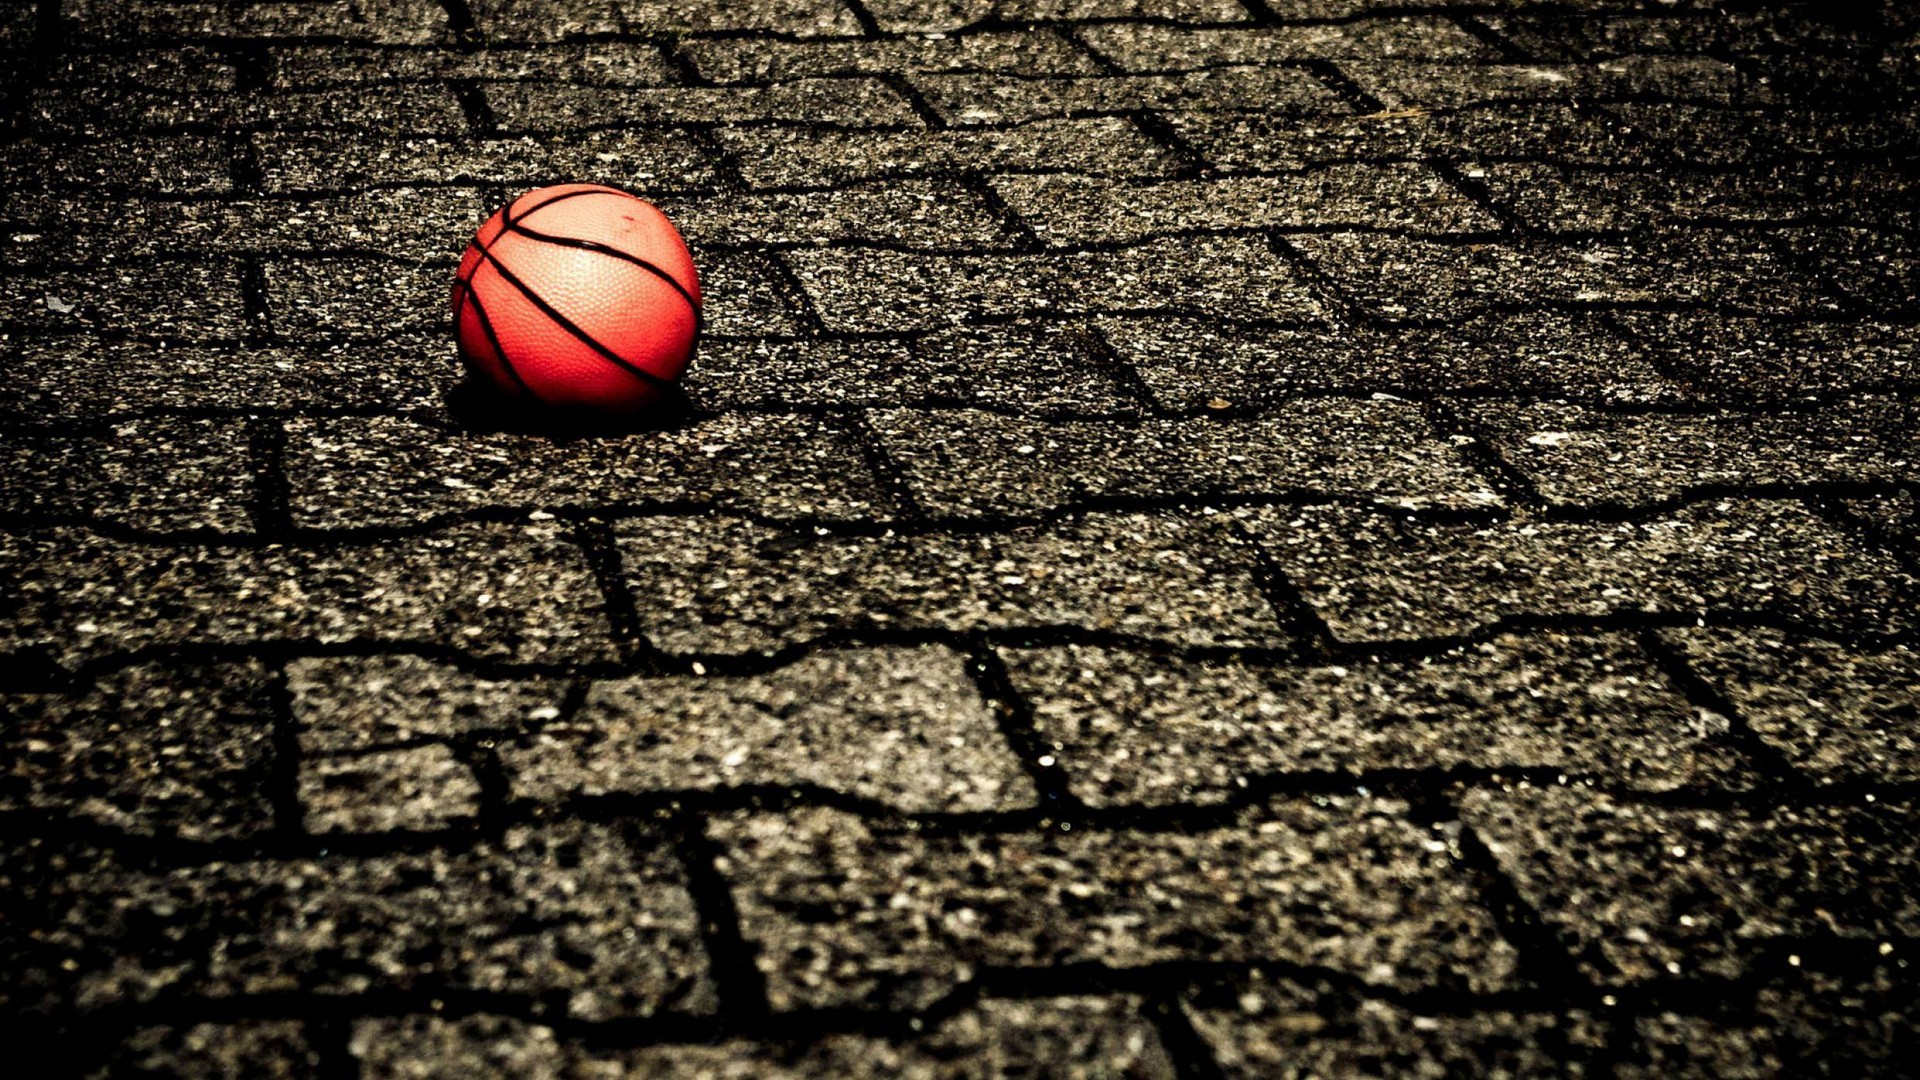 Basketball Wallpaper For Mac Backgrounds With Image - Sport Wallpaper Hd , HD Wallpaper & Backgrounds